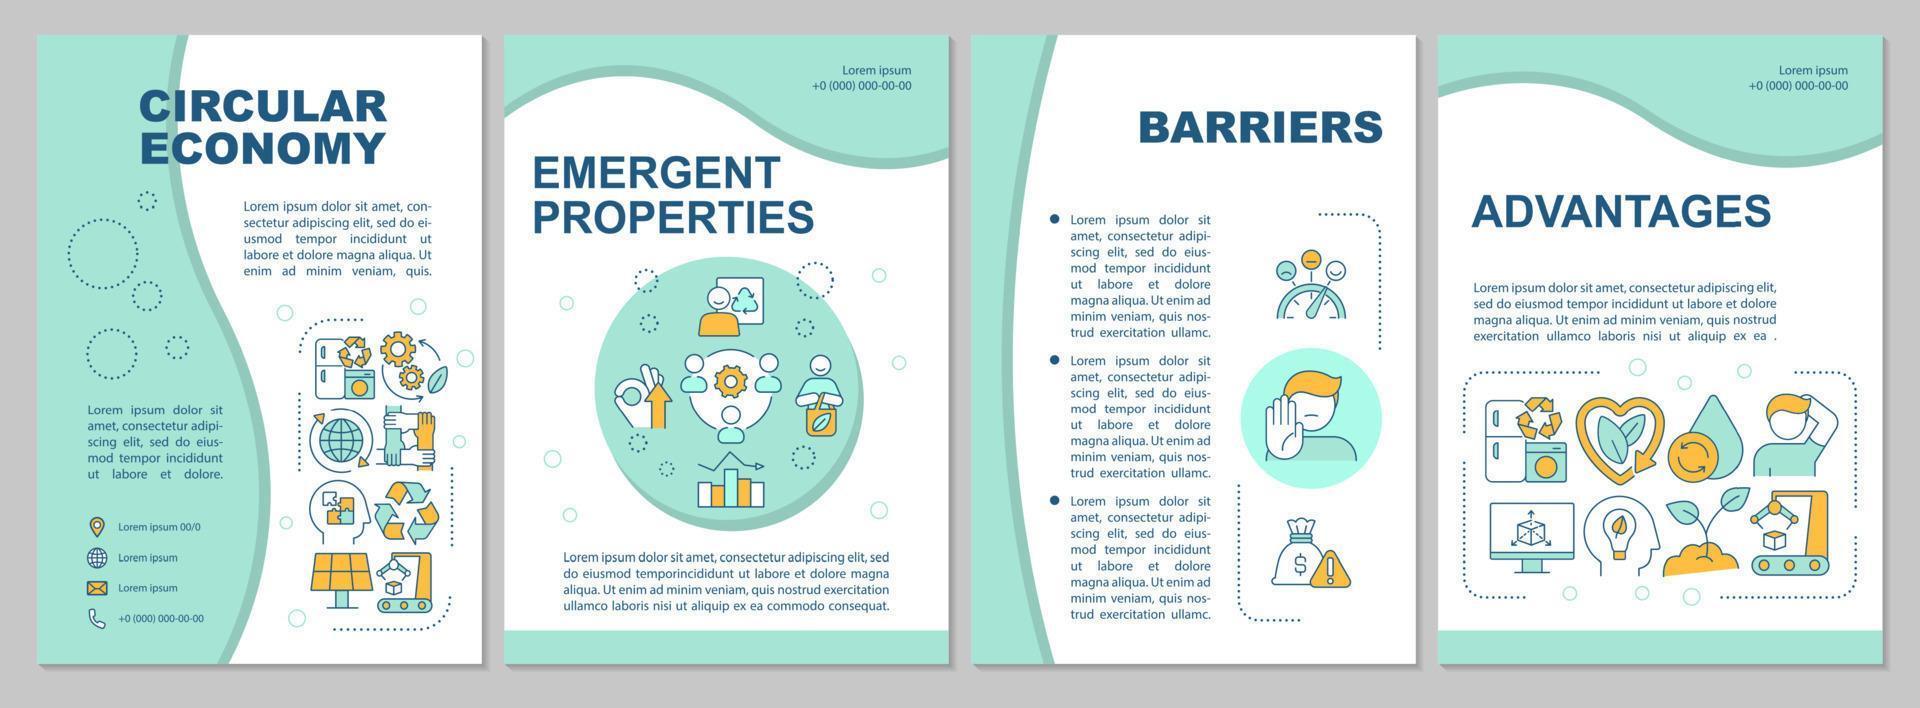 Circular economy model mint brochure template. Barriers and advantages. Leaflet design with linear icons. 4 vector layouts for presentation, annual reports.